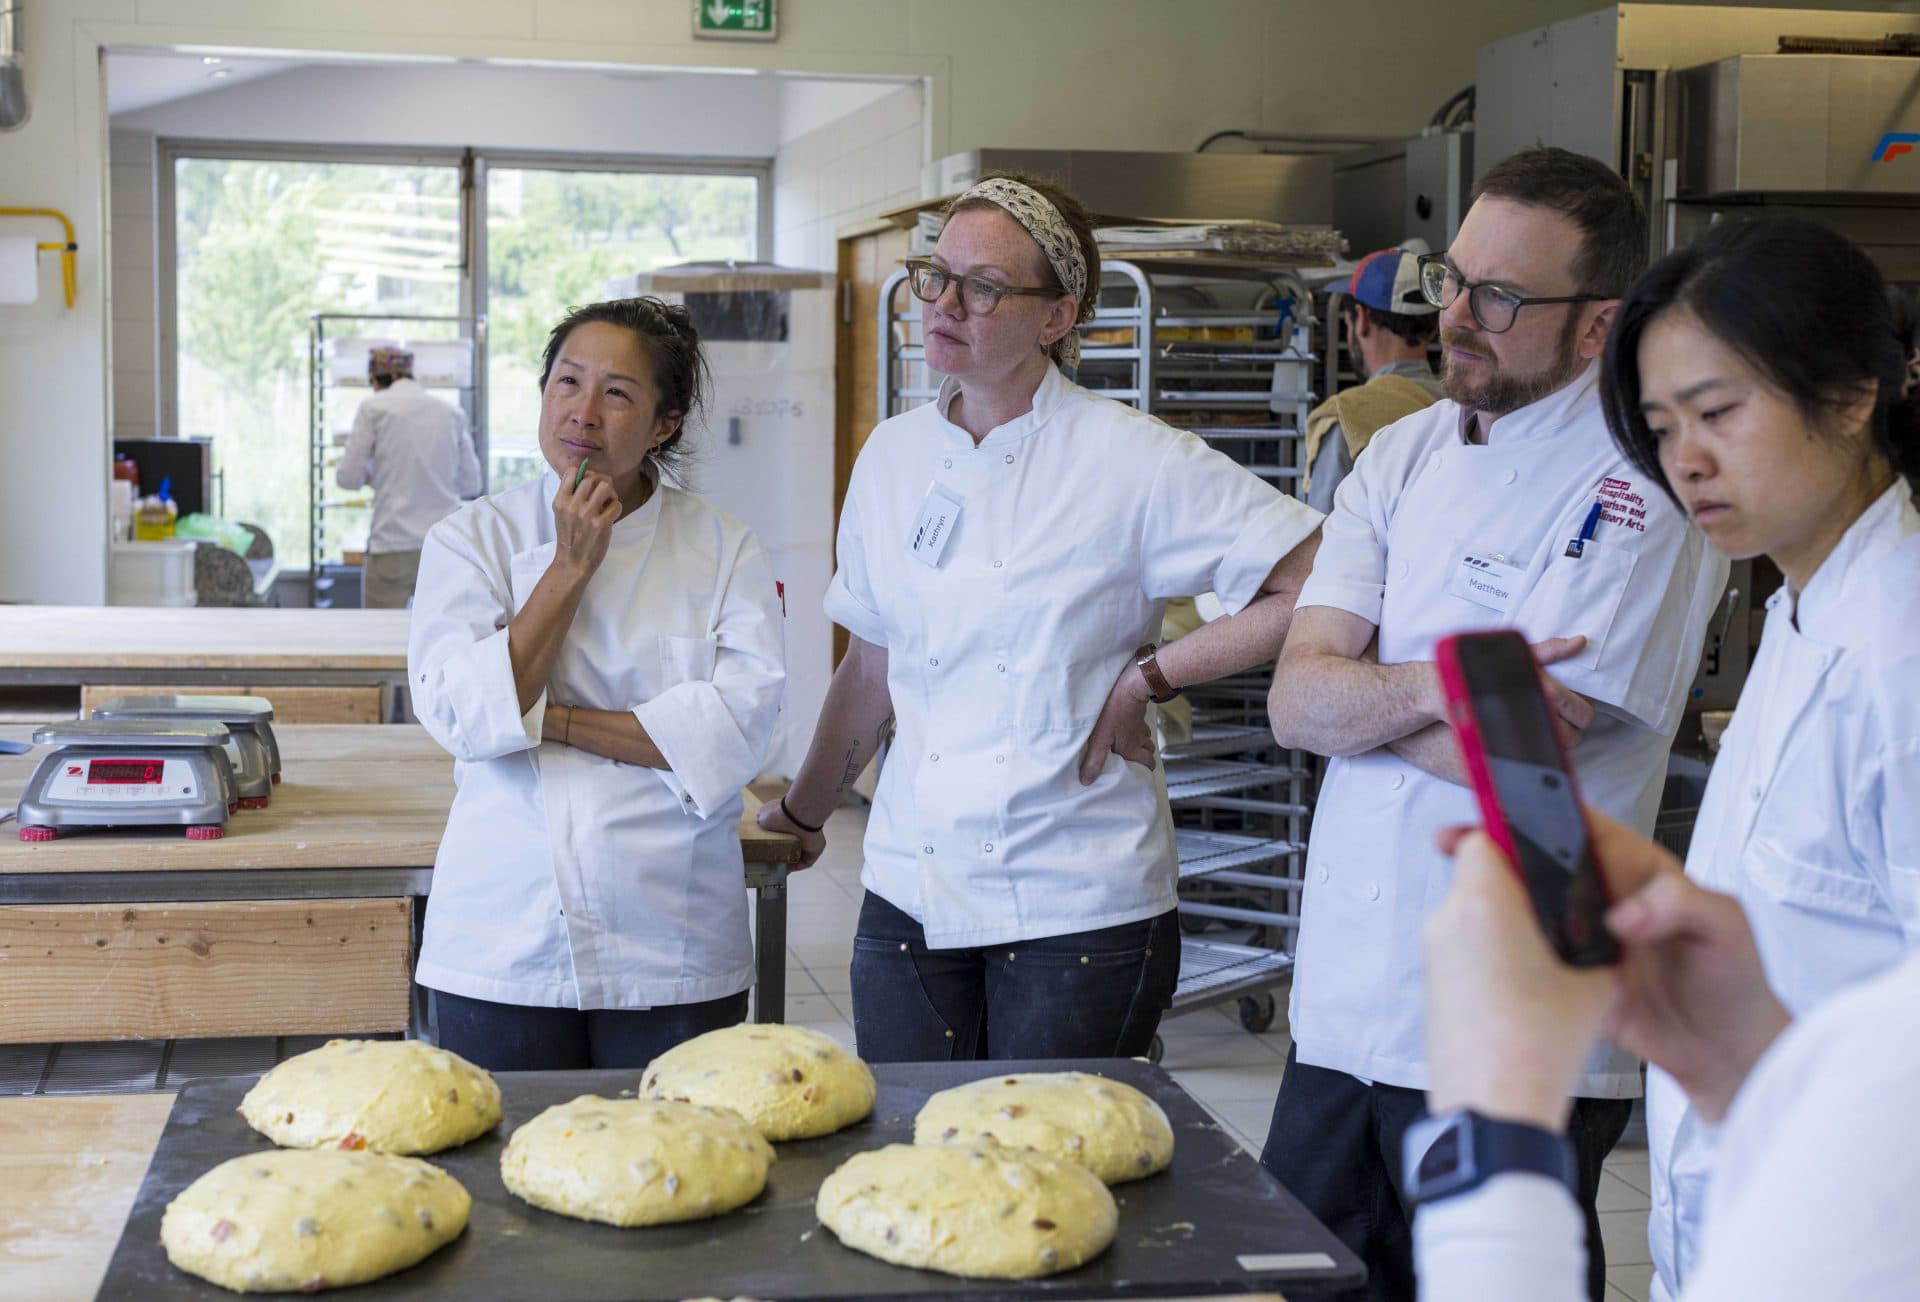 Other bakers taking the course.